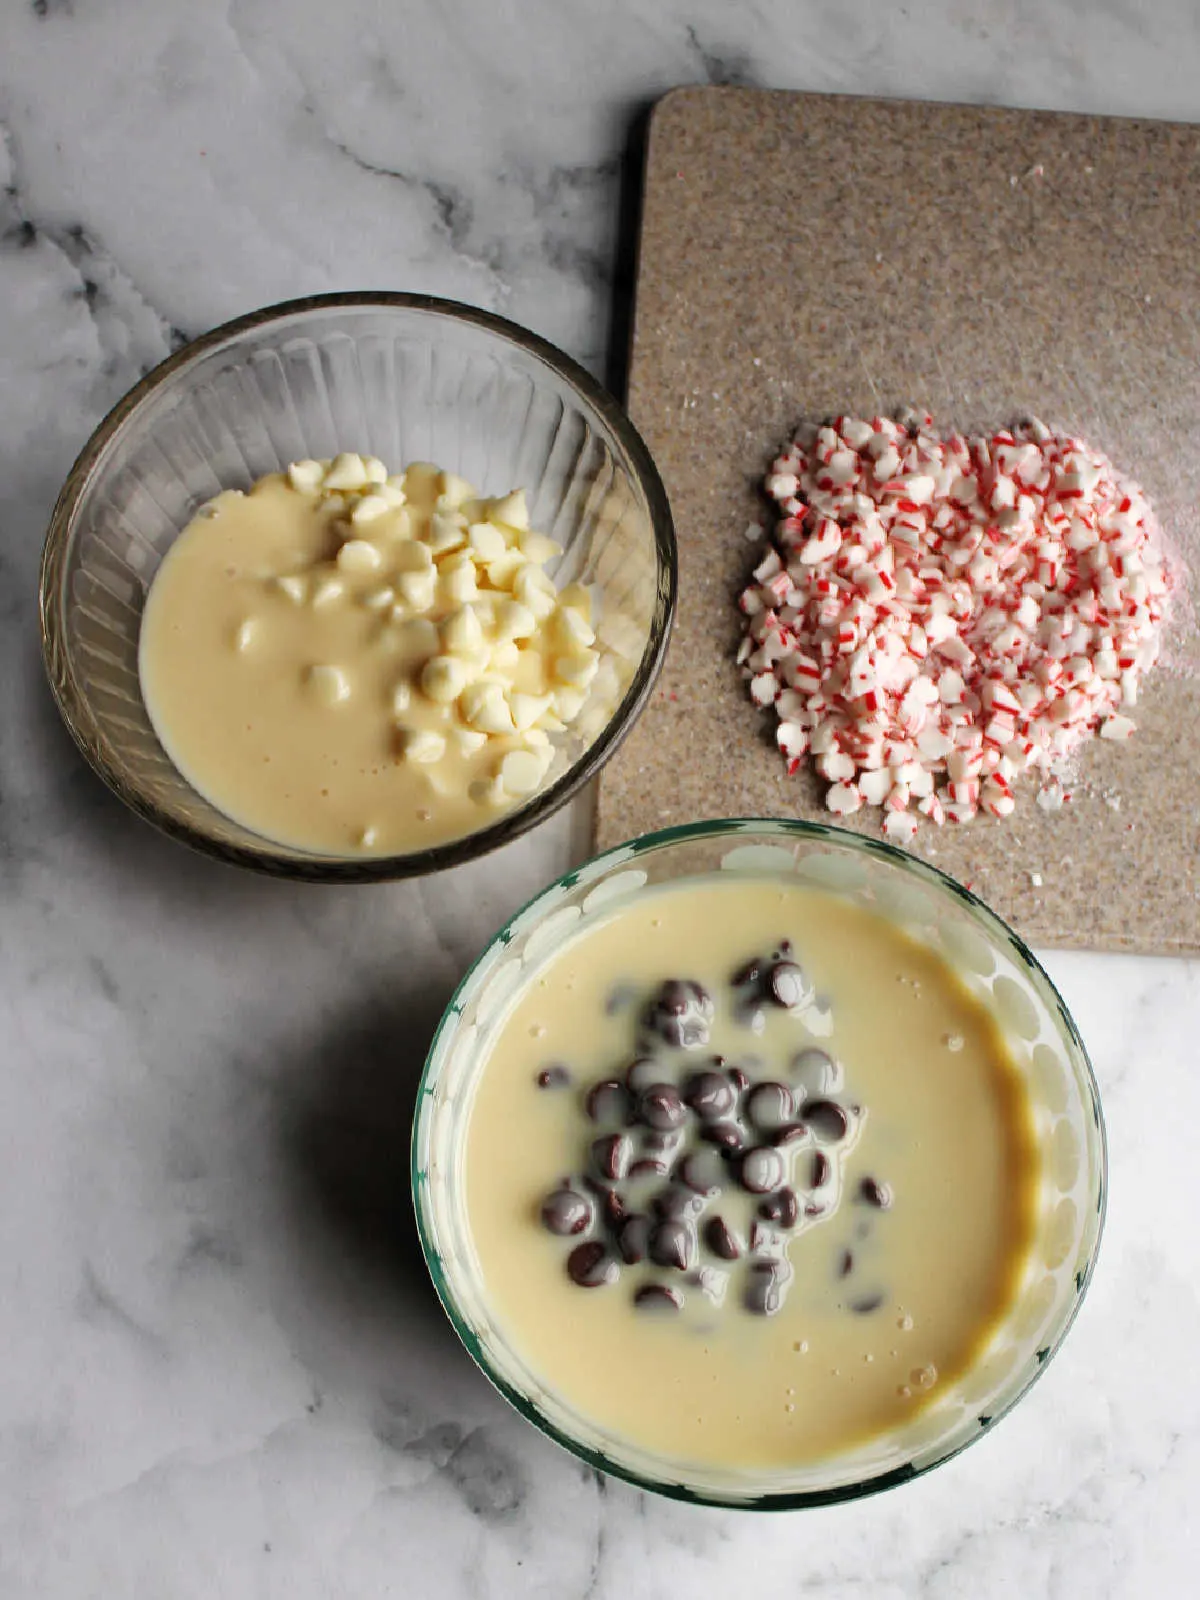 Condensed milk divided between two bowls along with the chocolate chips and white chocolate chips with chopped candy canes on cutting board. 